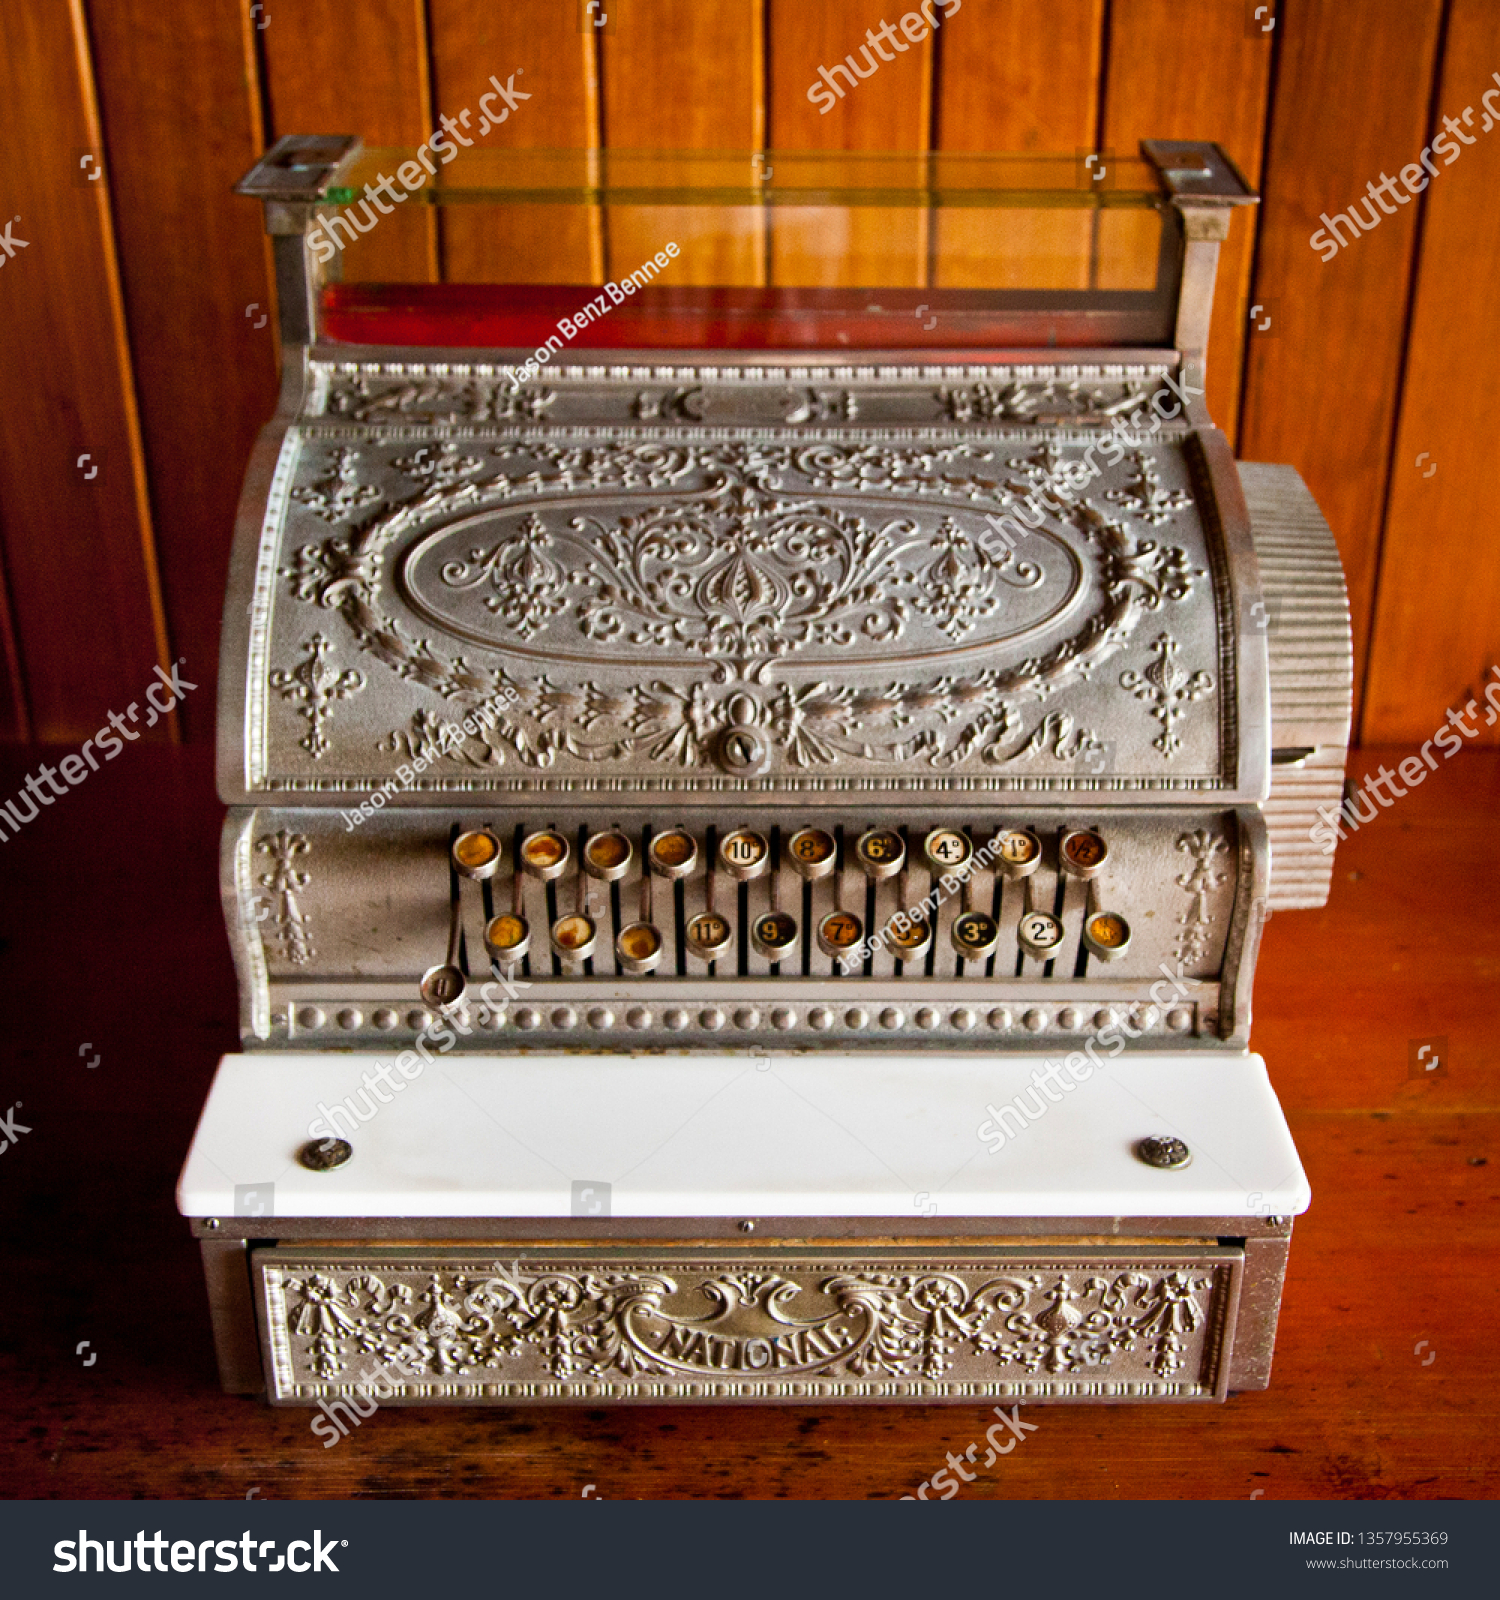 stock-photo-antique-cash-register-vintage-till-used-to-calculate-prices-old-fashioned-mechanical-metal-1357955369.jpg